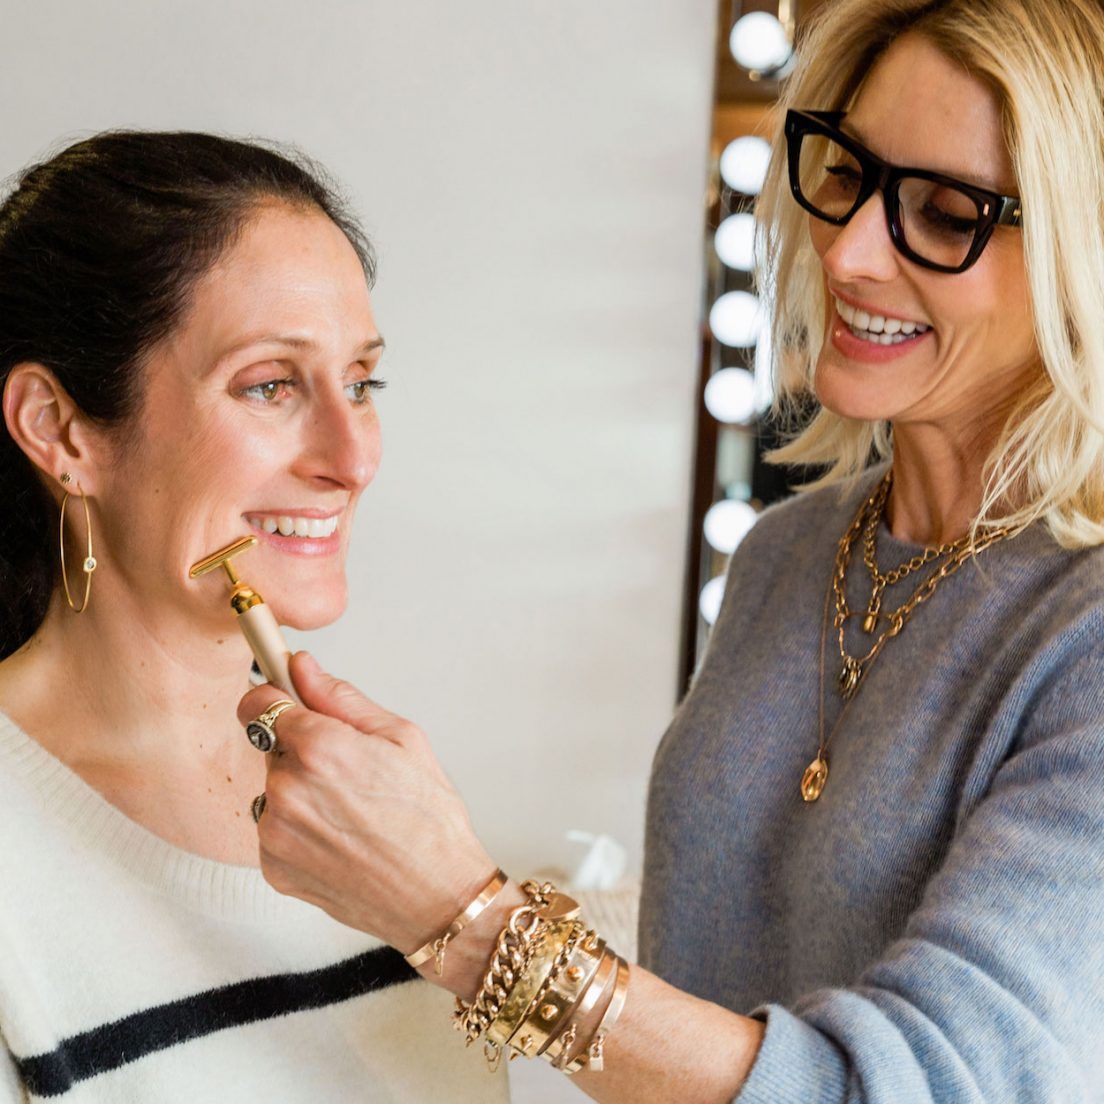 Lift, Tone, and Sculpt Skin with a Luxe New Vibrating Gold Bar | Goop - Lift, Tone, and Sculpt Skin with a Luxe New Vibrating Gold Bar | Goop -   17 gold beauty Bar ideas